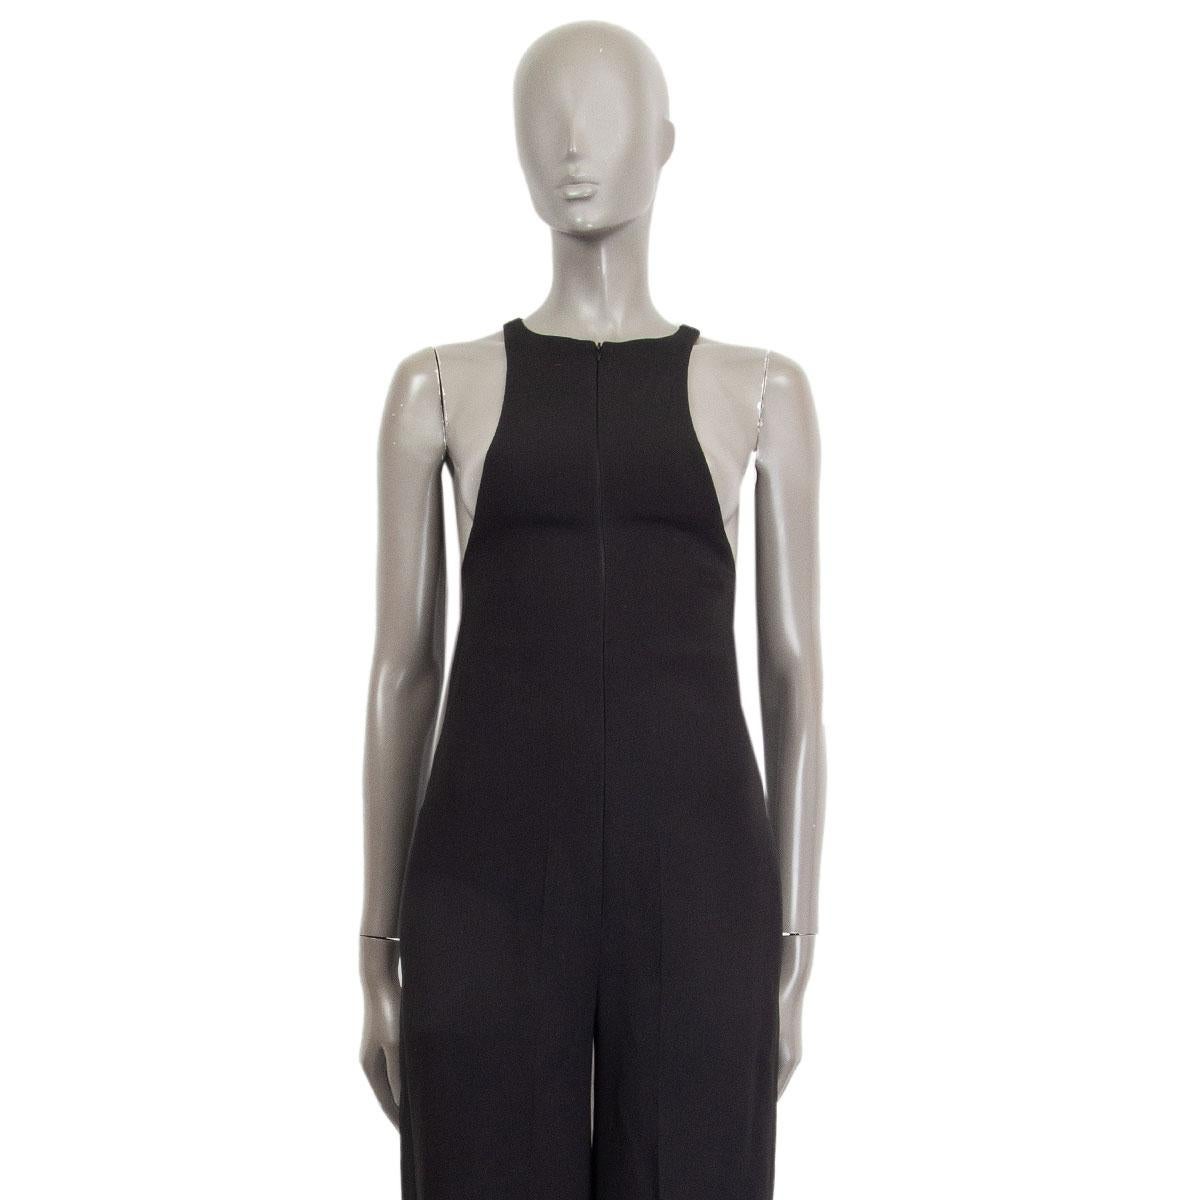 100% authentic Celine sleeveless, racer style top-part, jumpsuit in black viscose (65%), acetate (32%) and elastane (3%). Closes with a concealed zipper on the front and with slit pockets on the side. Lined in black silk (100%). Brand New with tag